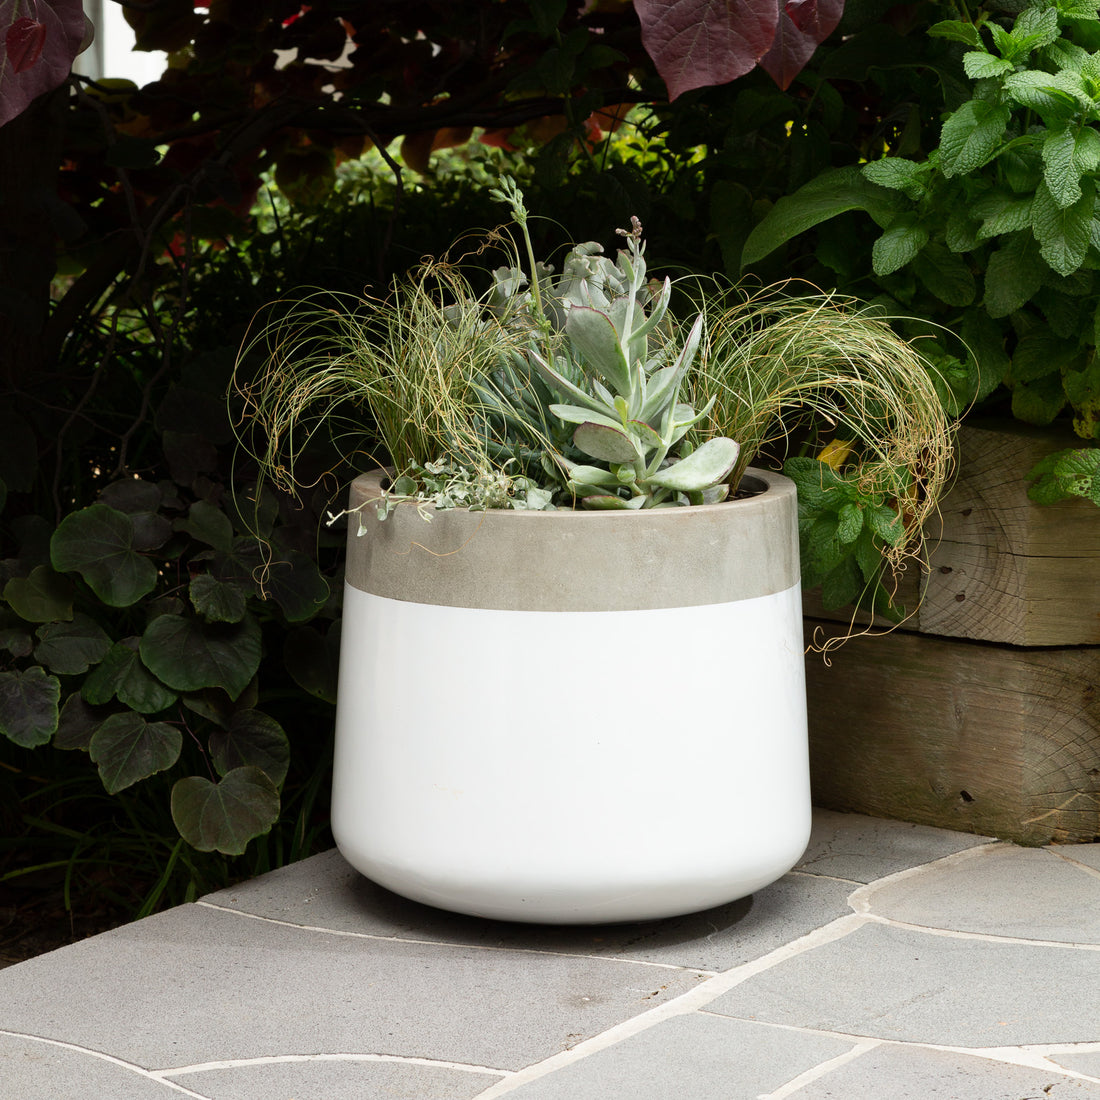 Bring a splash of coastal calm to your courtyard or patio